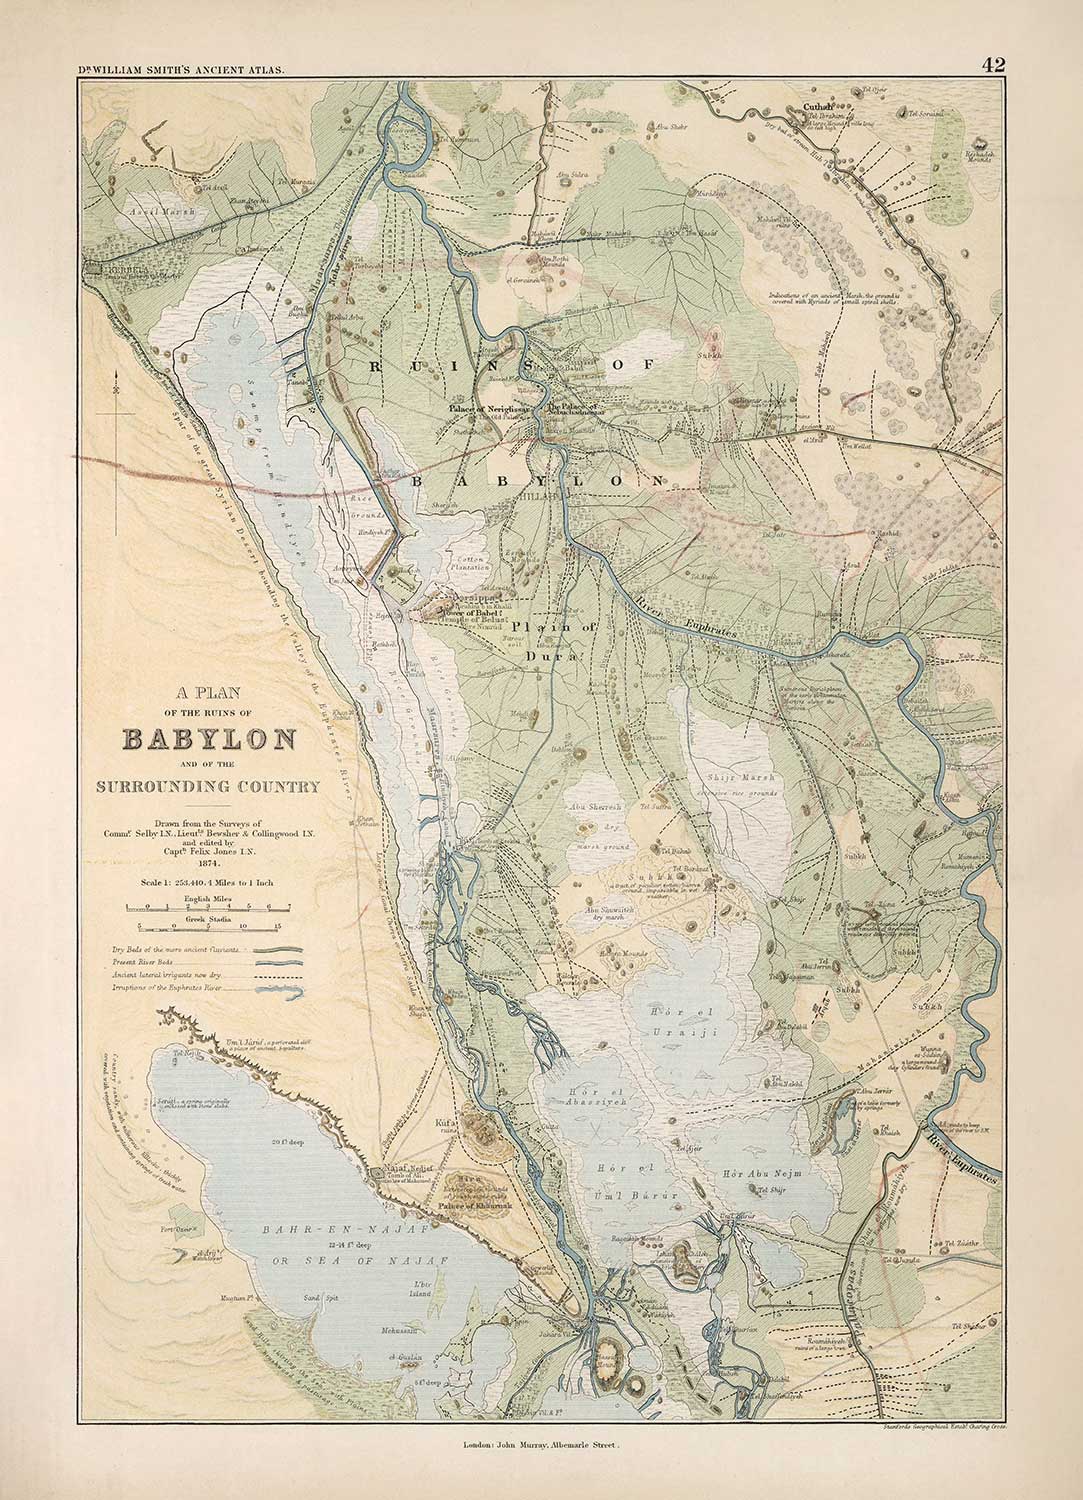 Old Map of the Ancient City of Babylon in 1874 by William Smith - Iraq, Babylonian Empire, Euphrates River, Hillah